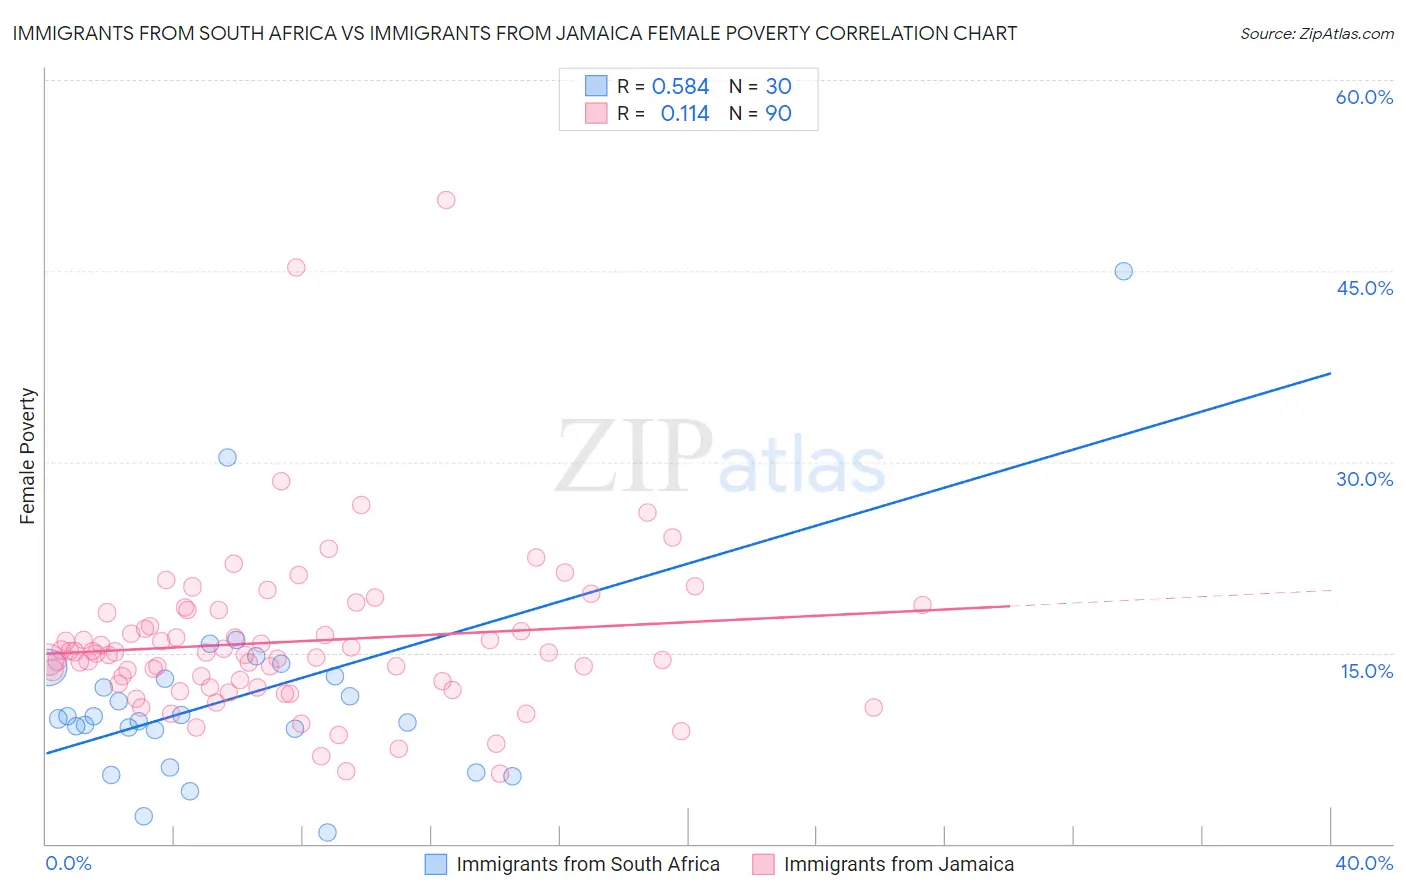 Immigrants from South Africa vs Immigrants from Jamaica Female Poverty